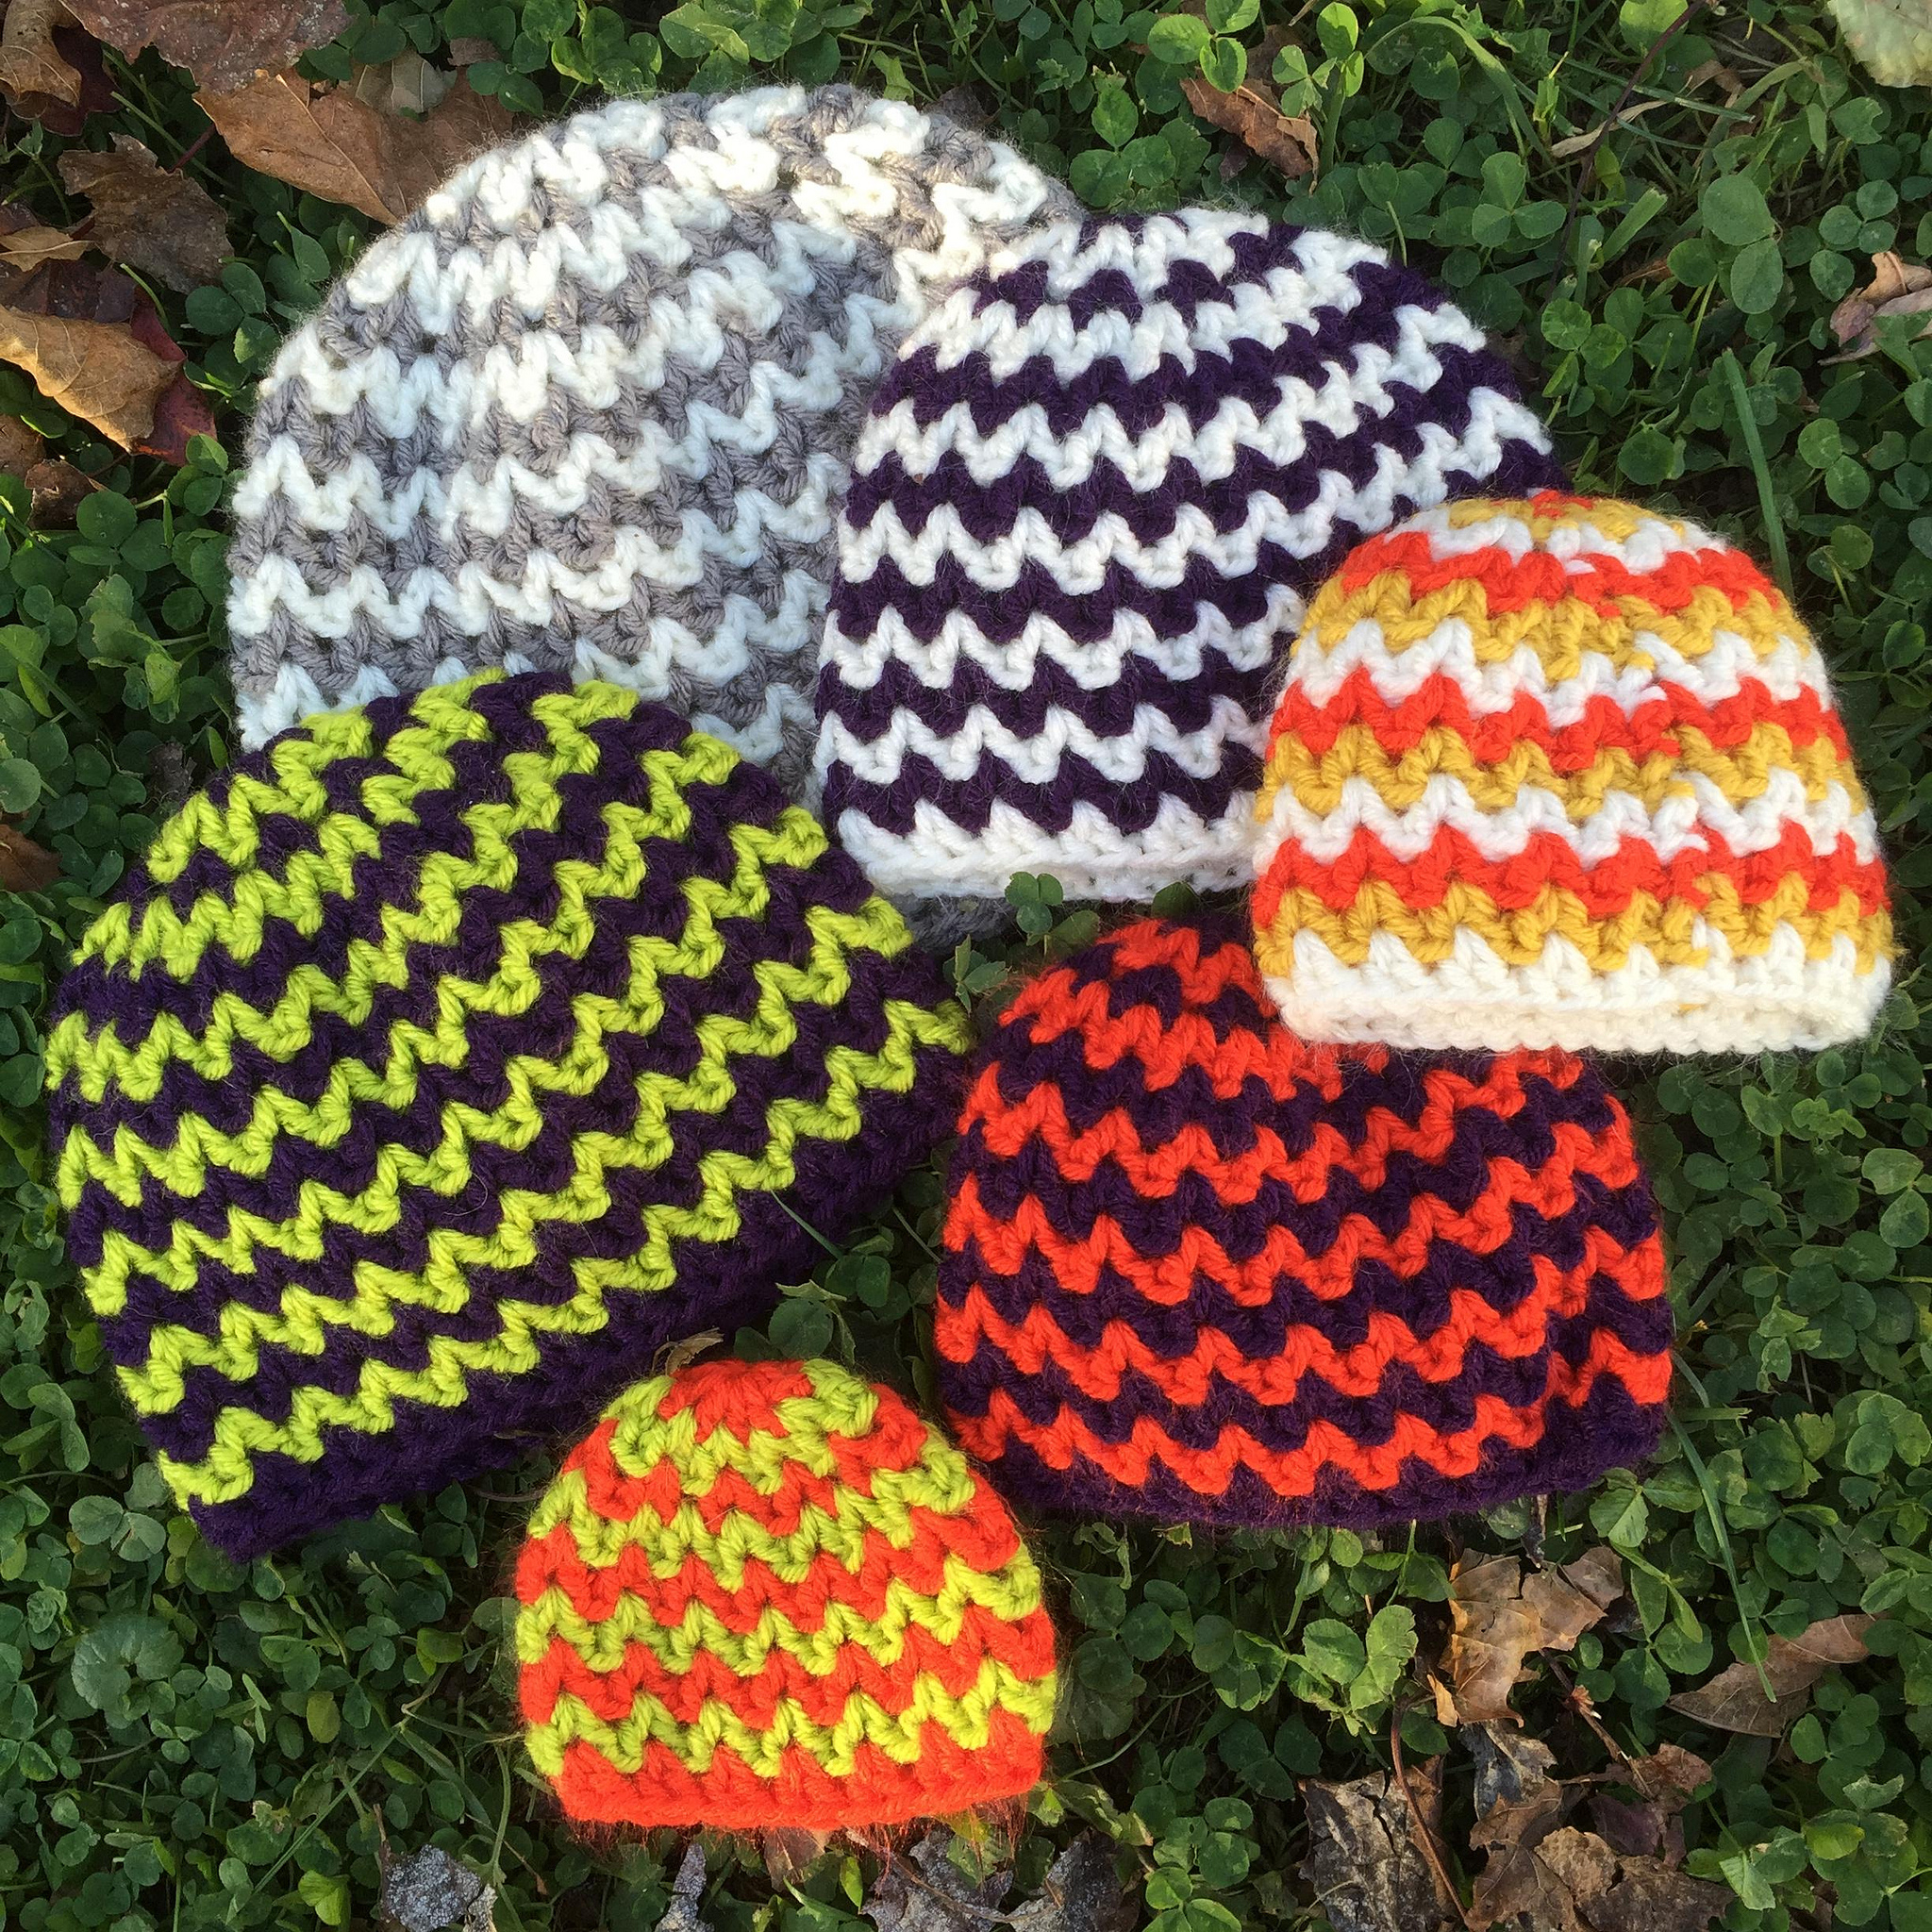 Knitted Preemie Hat Patterns Free Crochet Pattern Quick And Simple Chevron Hats Preemie